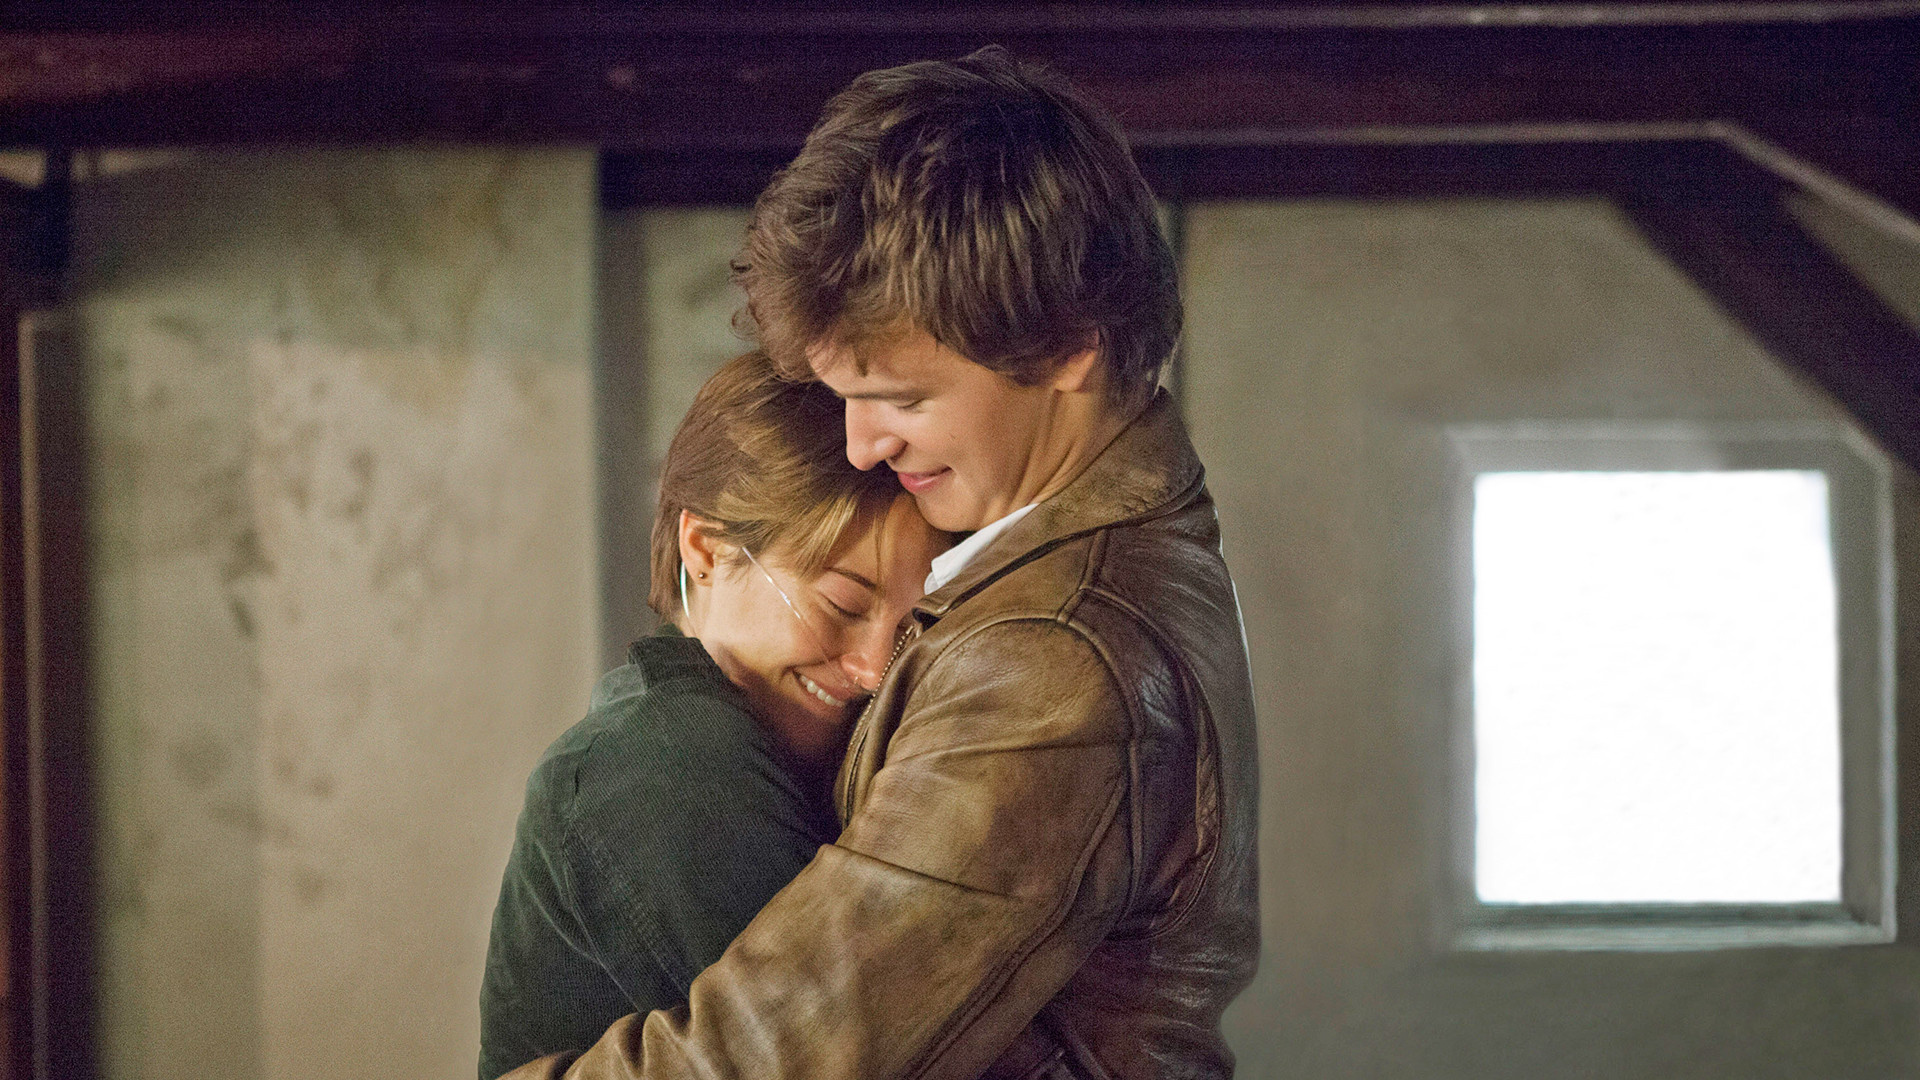 The Fault in Our Stars, Stunning wallpapers, Beautiful pictures, Emotional, 1920x1080 Full HD Desktop